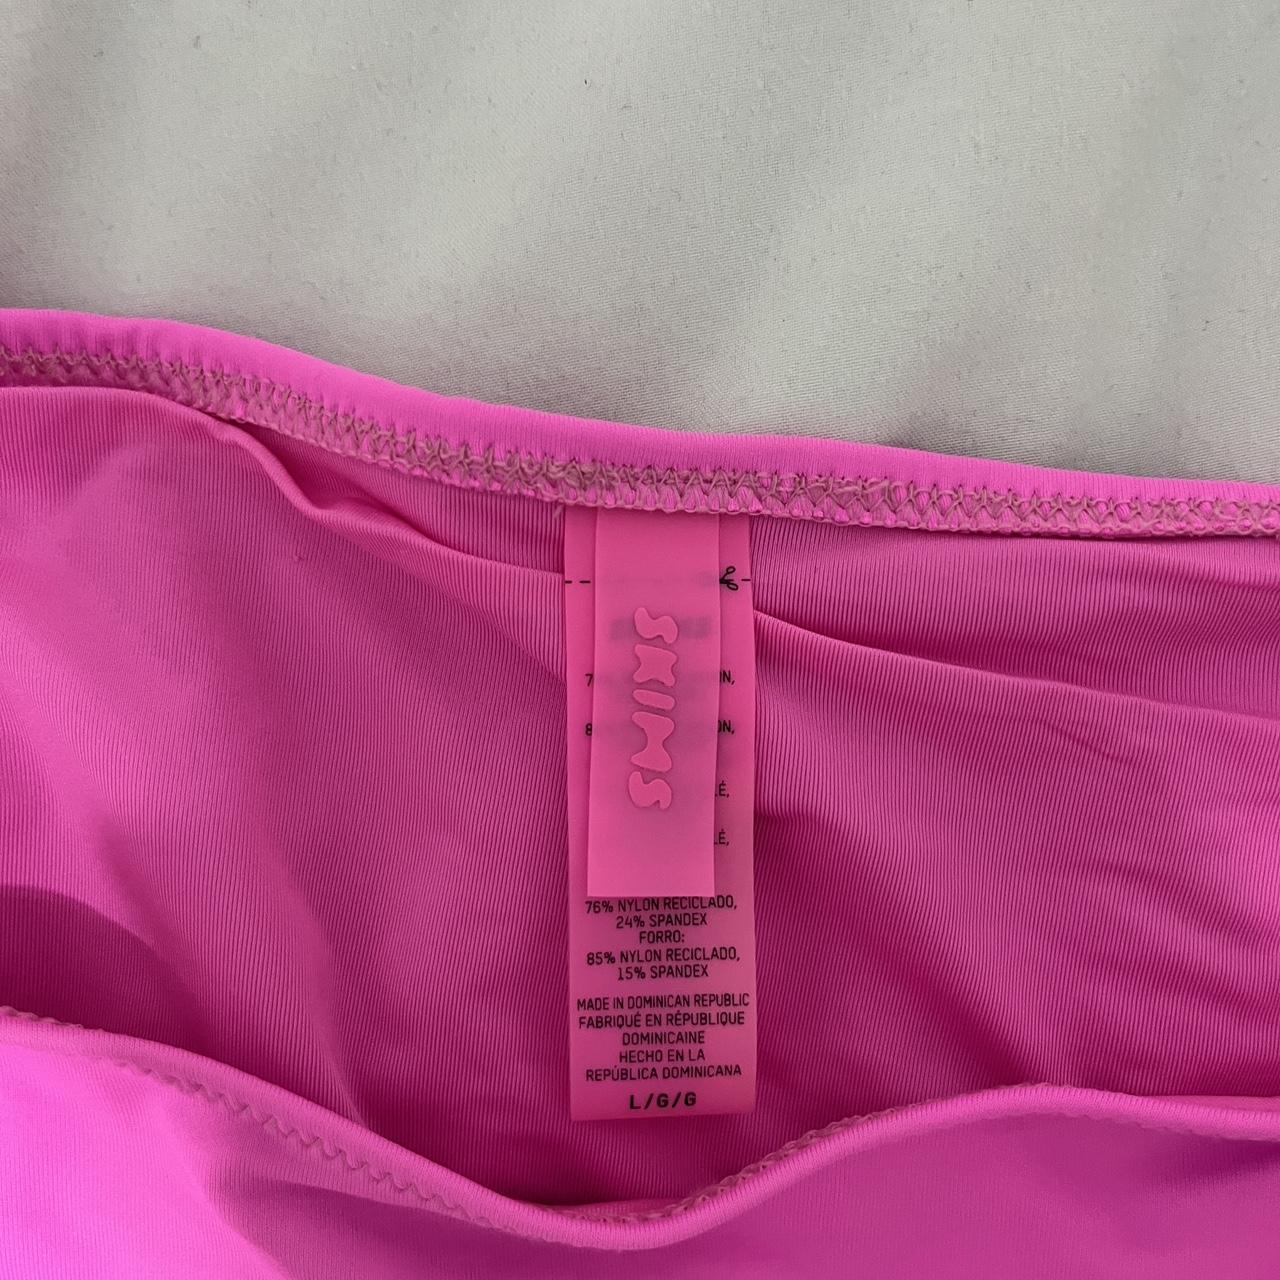 skims bikini in taffy sold out on site top m bottoms... - Depop